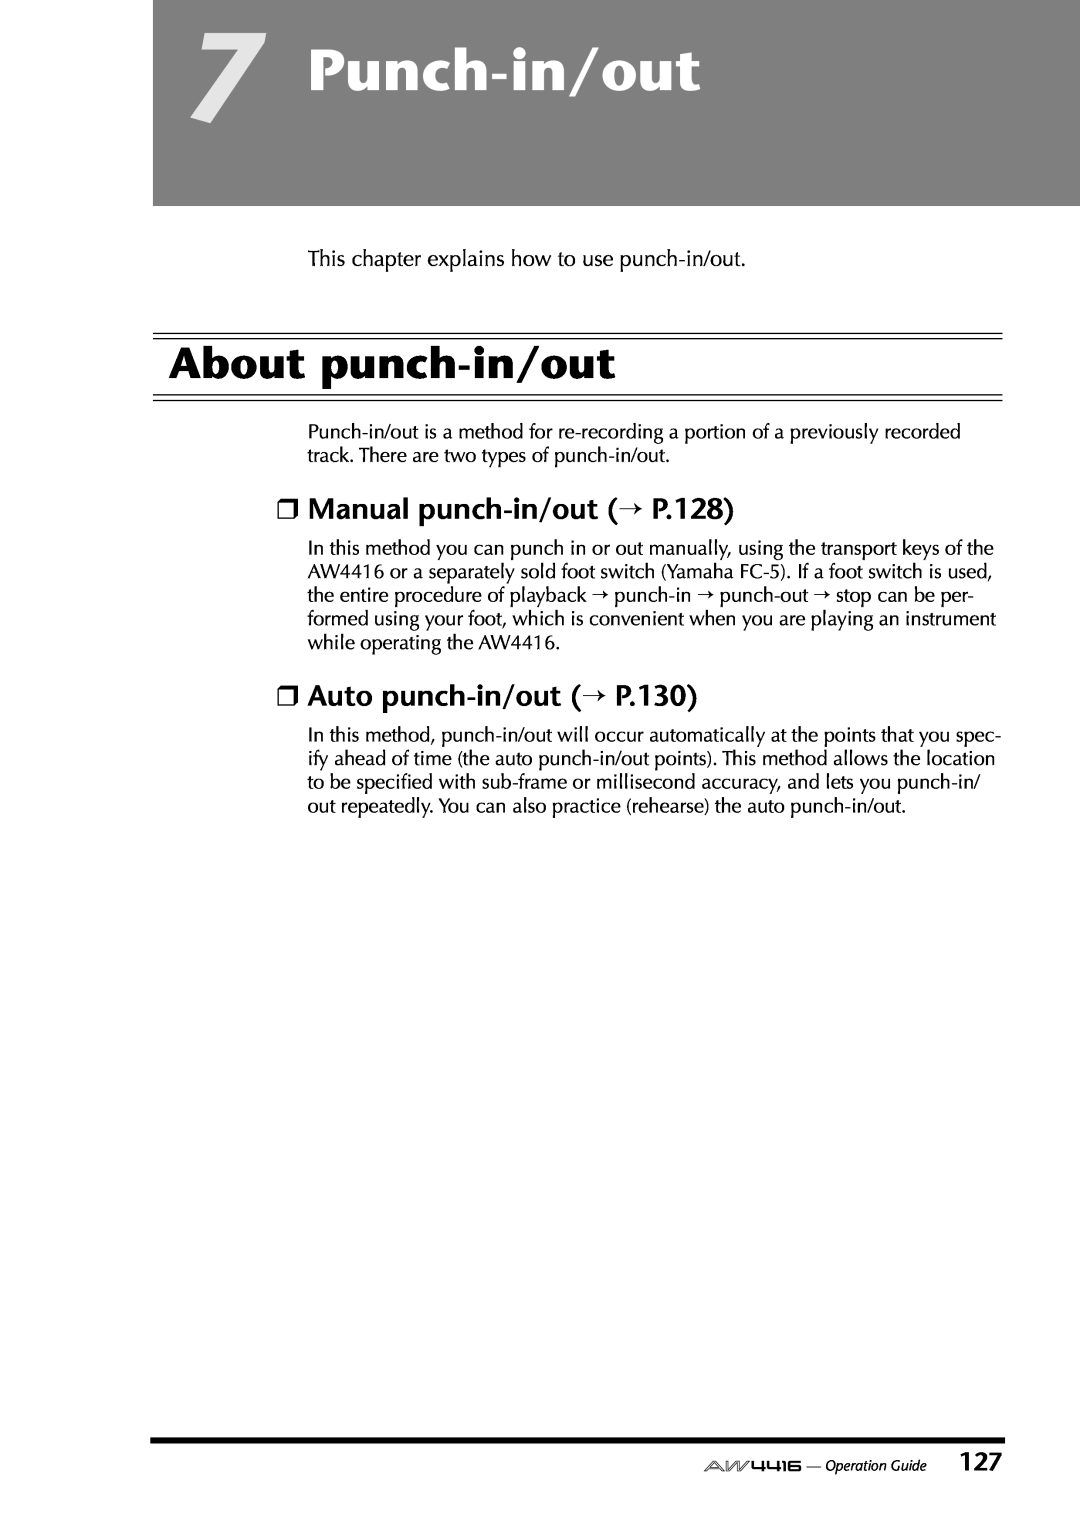 Yamaha AW4416 manual Punch-in/out, About punch-in/out, Manual punch-in/out→ P.128, Auto punch-in/out→ P.130 